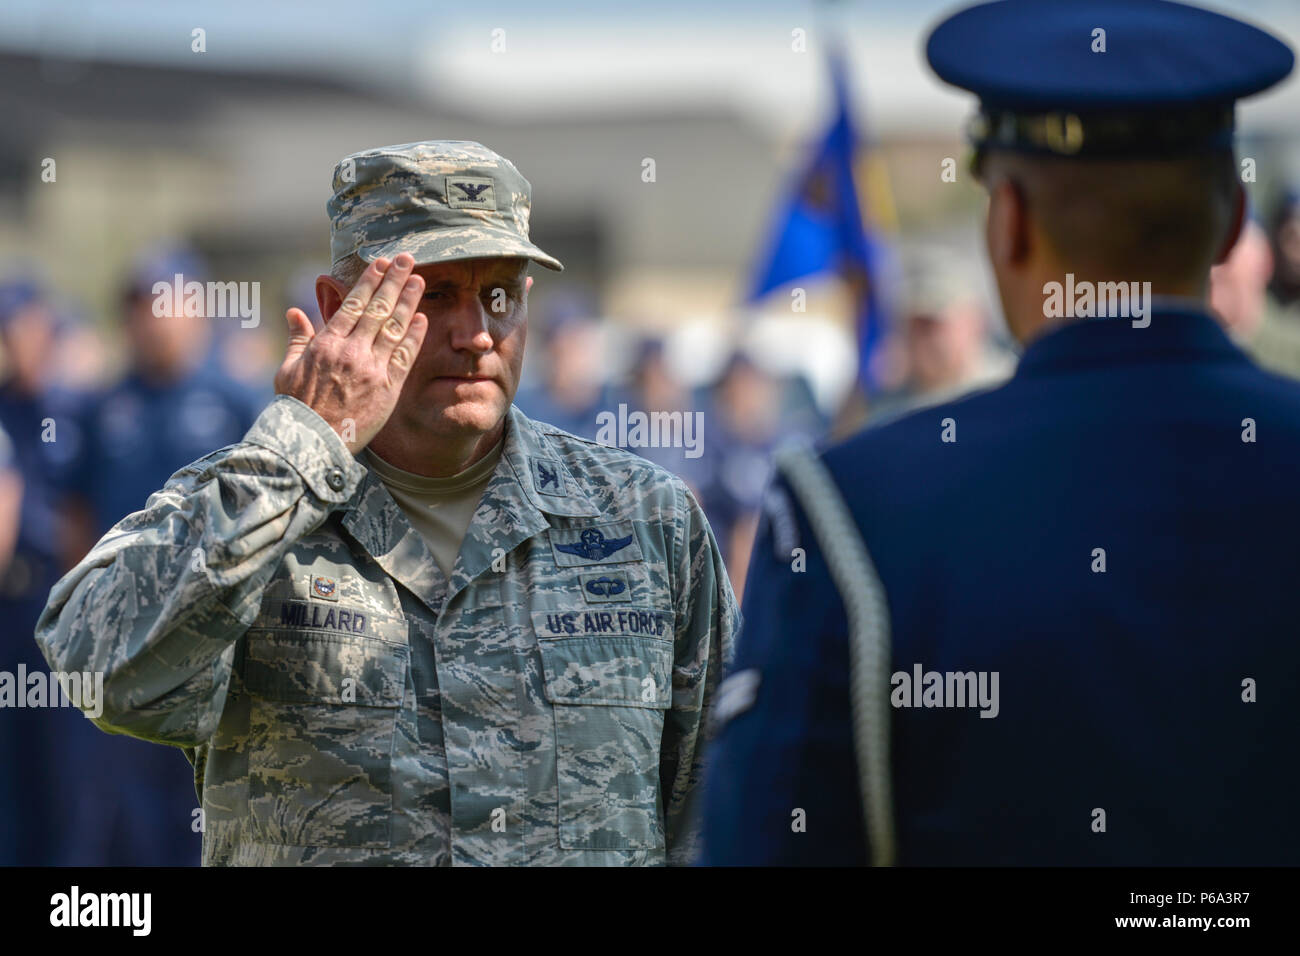 Col. J.C. Millard, 89th Airlift Wing commander, salutes an 11th Wing honor guard member and orders him to secure the American flag, during a Memorial Day retreat ceremony at the 89th AW headquarters building at Joint Base Andrews, Md., May 26, 2016. Memorial Day is an American federal holiday to remember those who died while serving in the U.S. armed forces. (U.S. Air Force photo by Senior Master Sgt. Kevin Wallace/RELEASED) Stock Photo